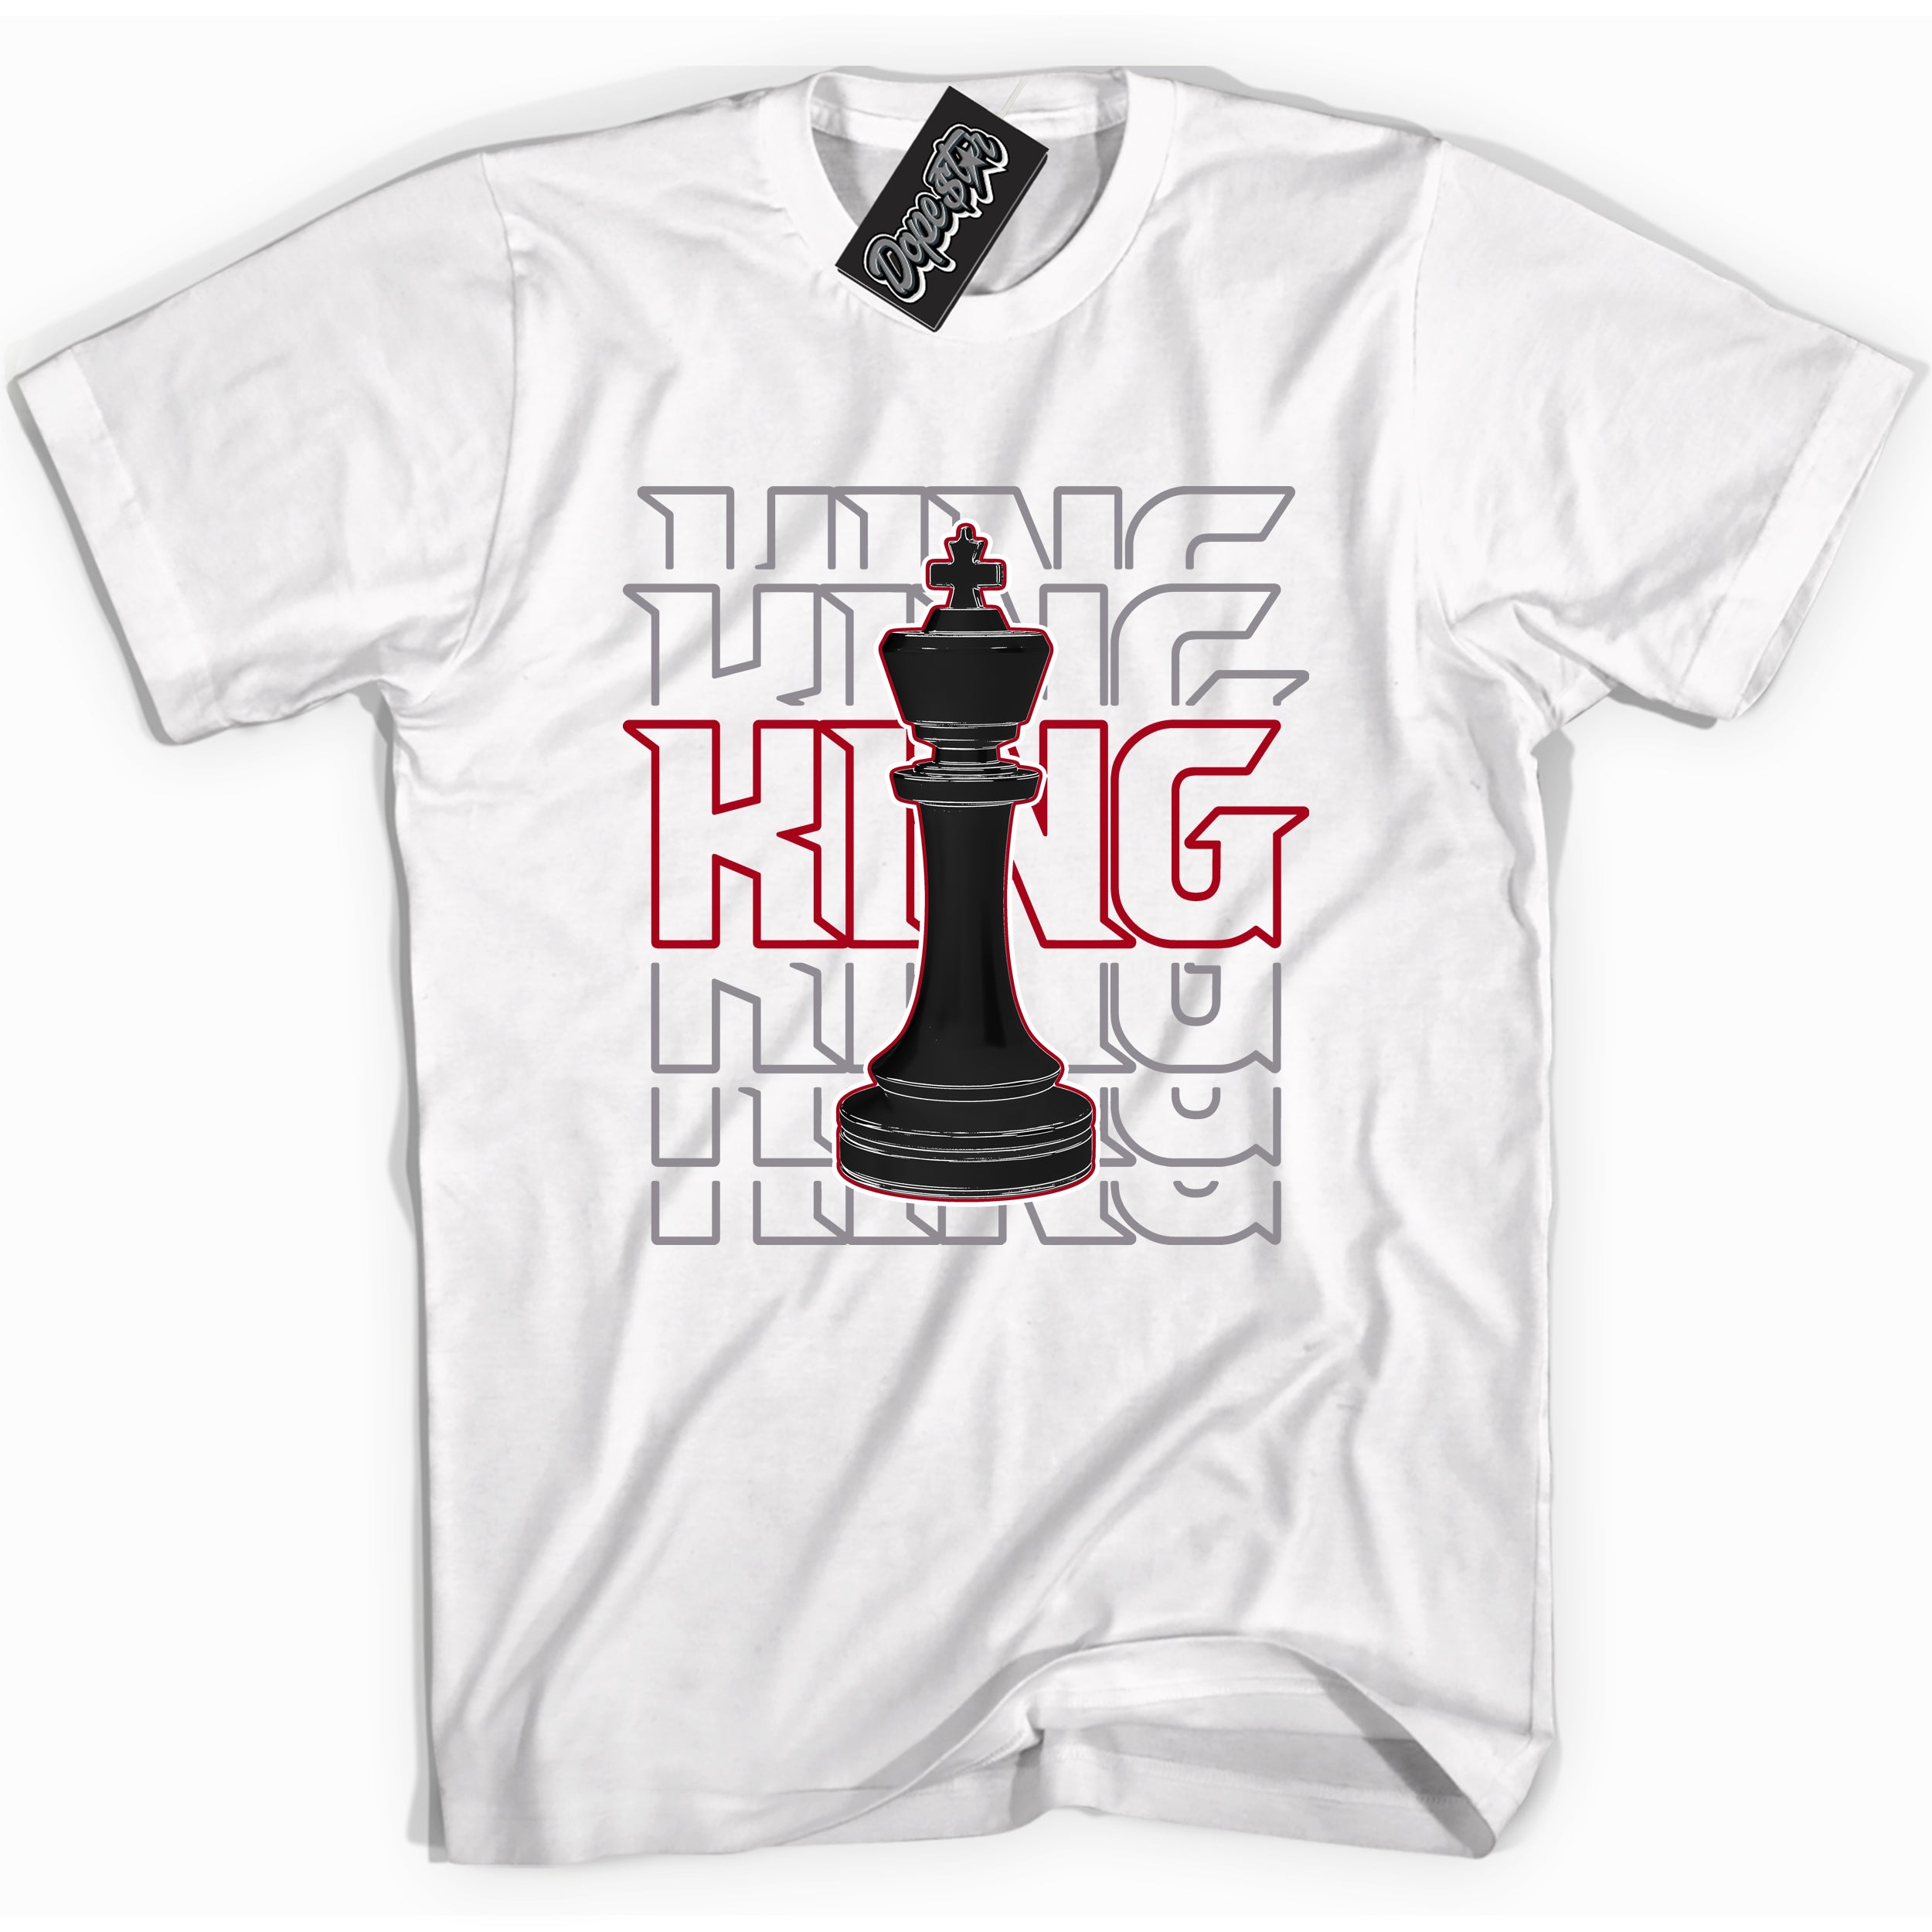 Cool White Shirt with “ King Chess” design that perfectly matches Bred Reimagined 4s Jordans.